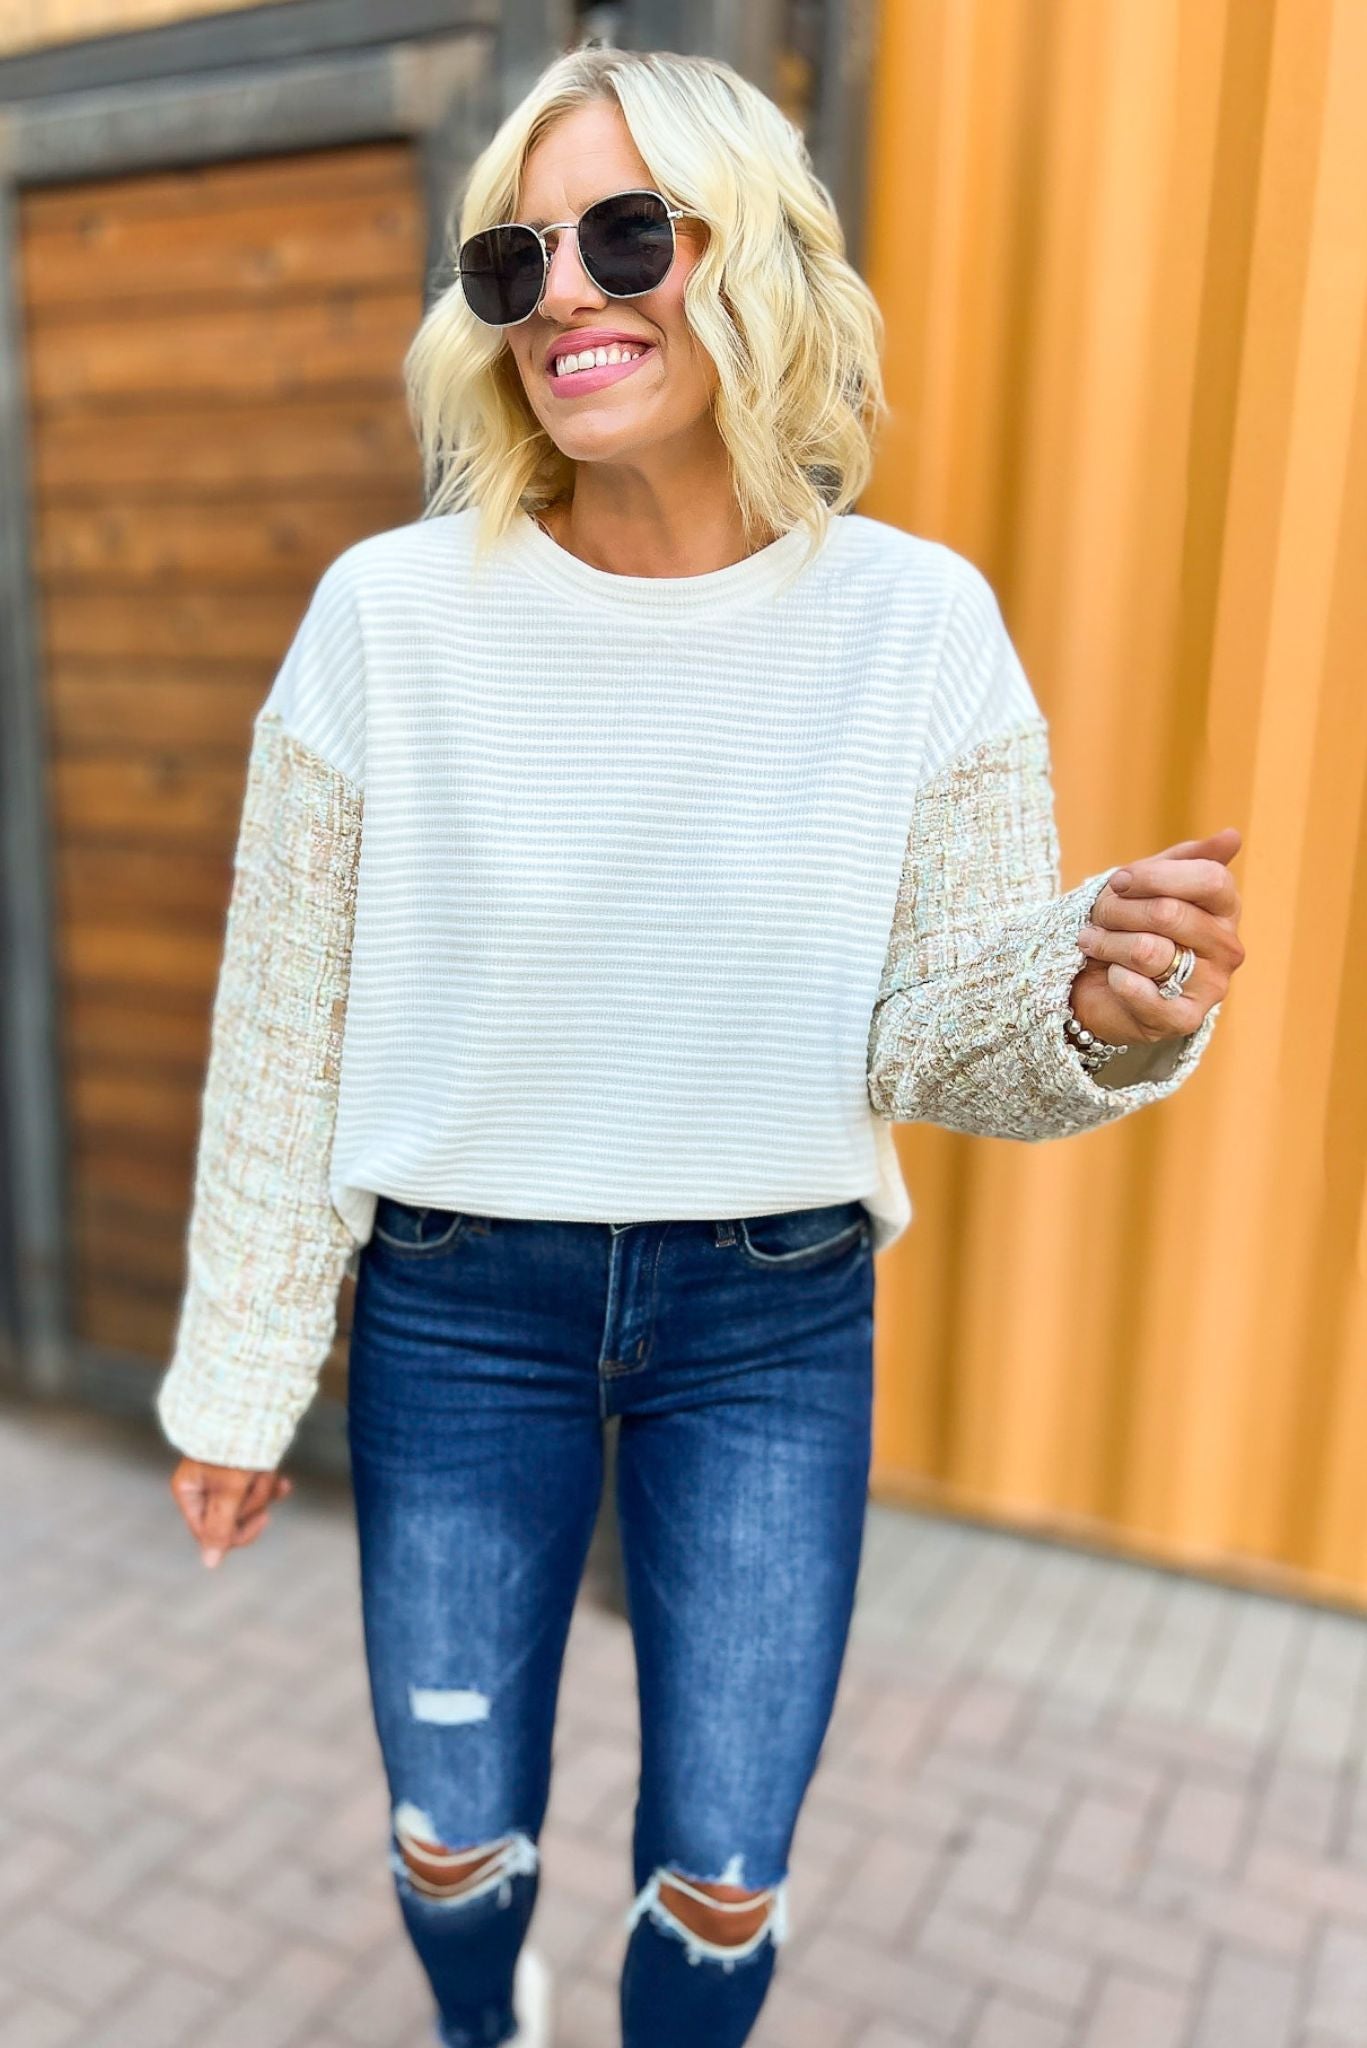 Load image into Gallery viewer, Off white Knit Tweed Sleeve Sweater, tweed detail, must have, girly look, mom style, shop style your senses by mallory fitzsimmons
